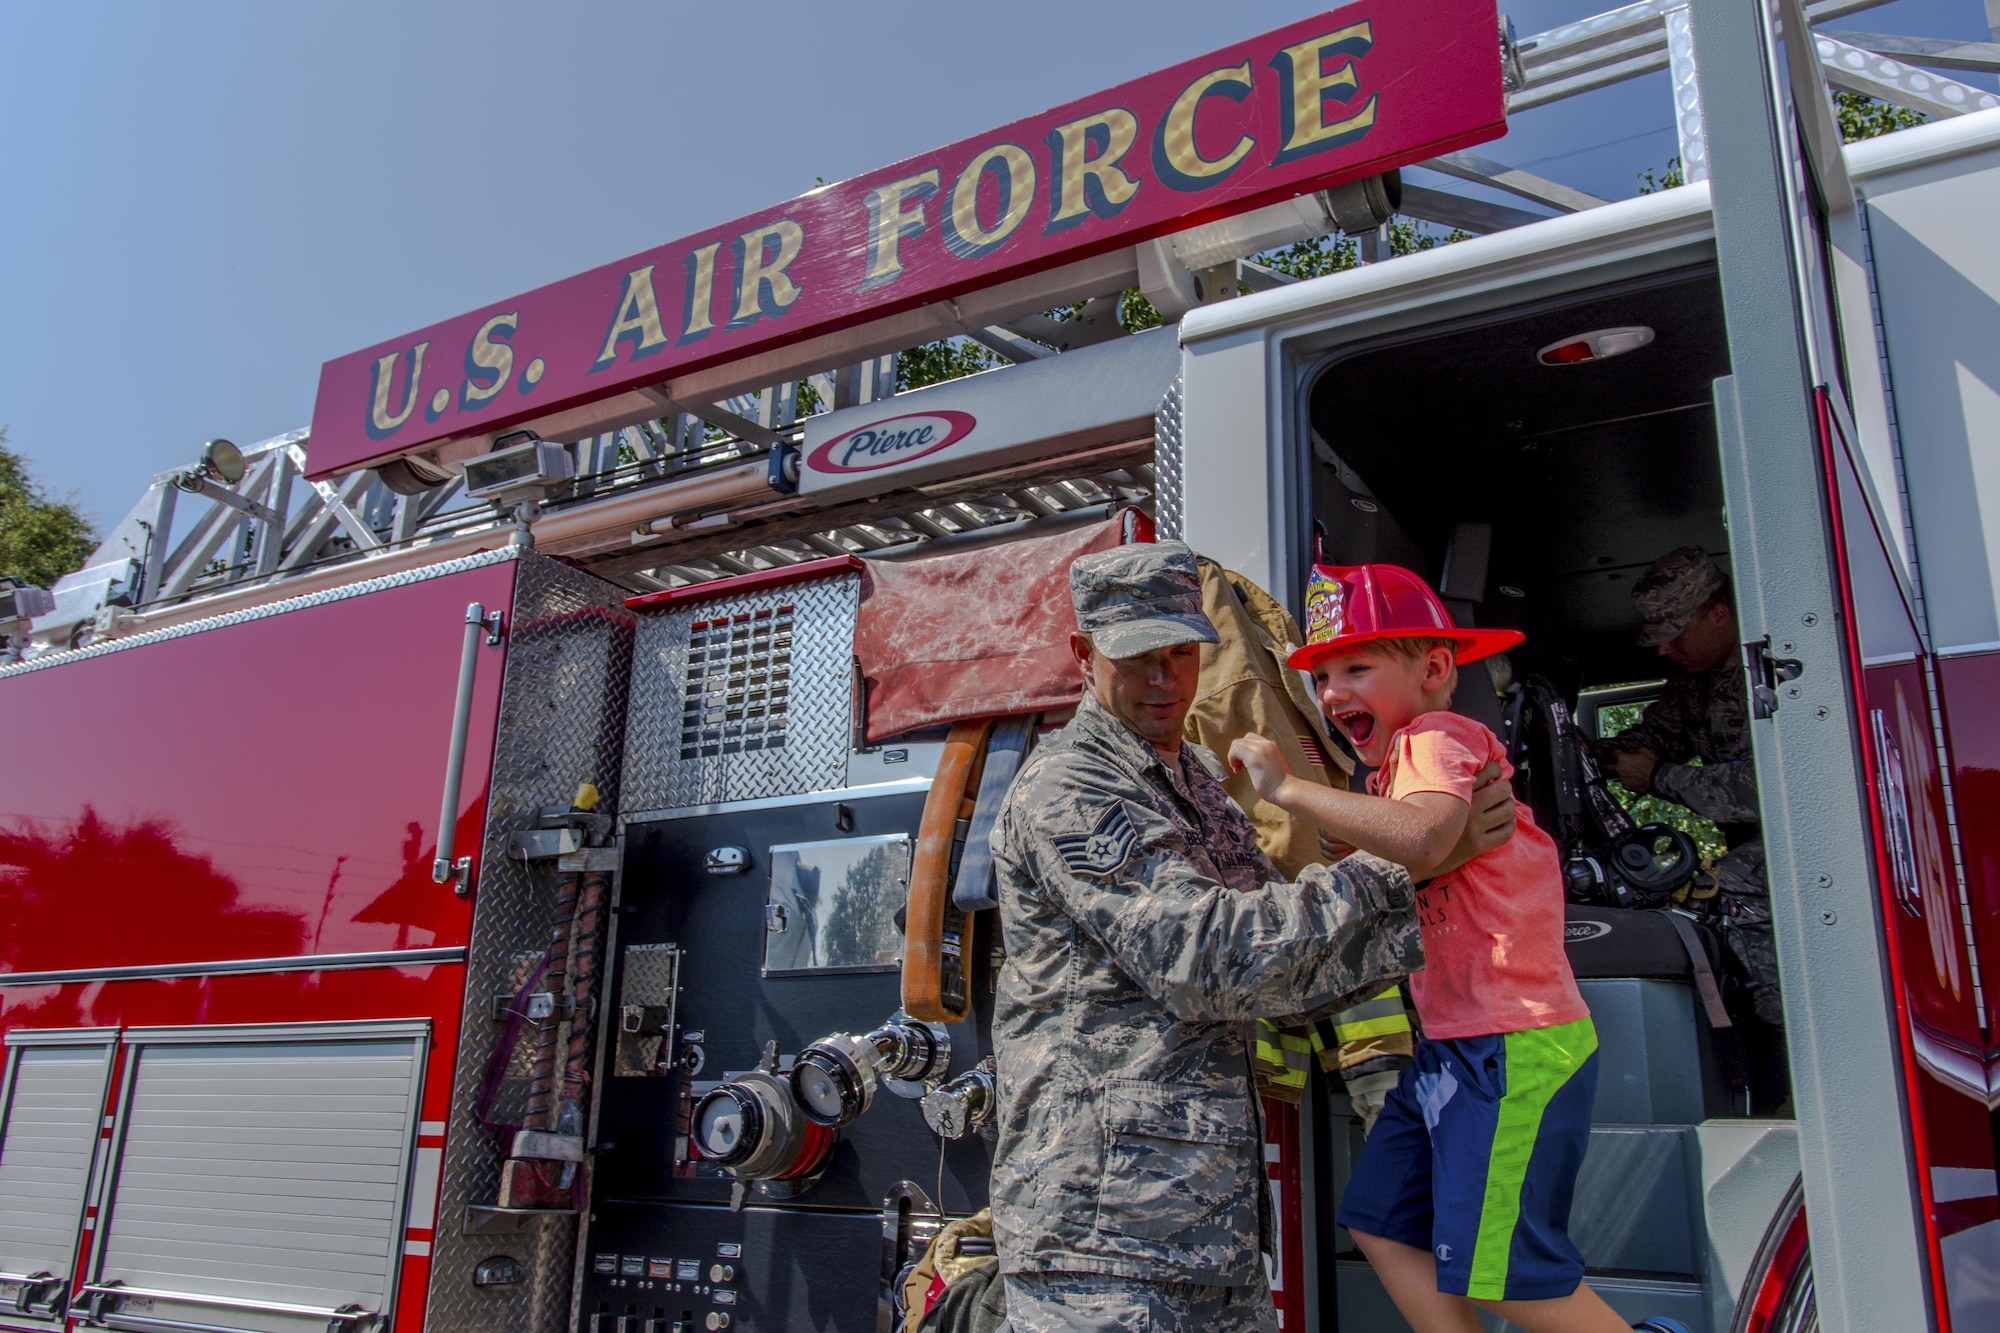 Staff Sgt. Nick Behr, 445th Airlift Wing crew chief, helps a young boy down from a fire engine during Big Truck Day, July 28, Destin, Fla. A 96th Civil Engineer Group fire engine was on display and firefighters educated the public on fire safety. Fire, construction, garbage and utility trucks were on display for kids to see up close at the city’s annual event. (U.S. Air Force photo/Kristin Stewart)